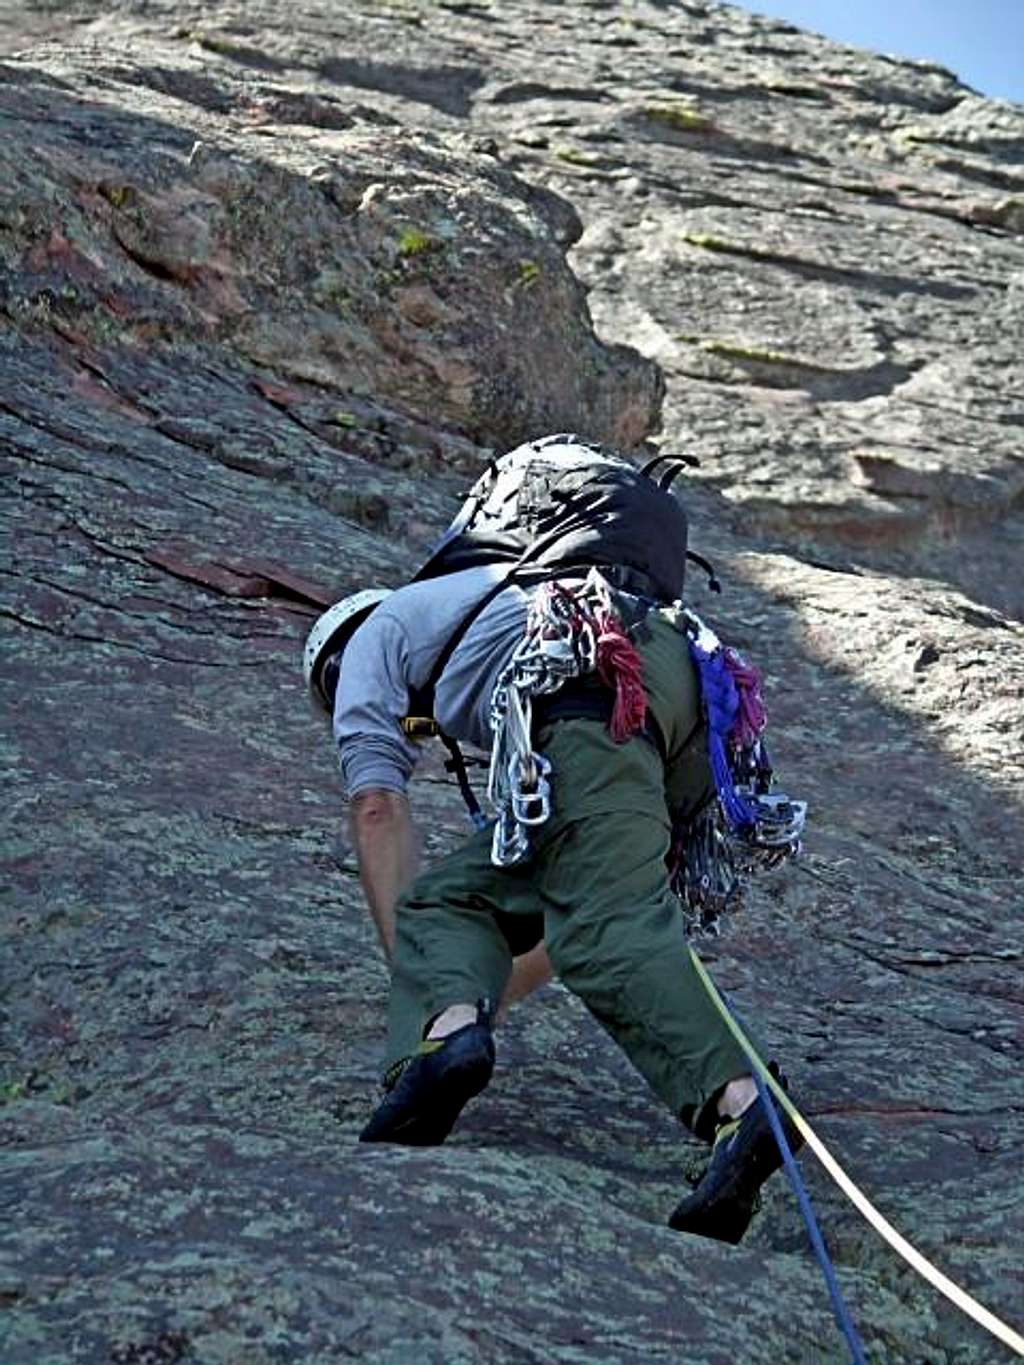  Fourth Pitch of the Direct East Face Route